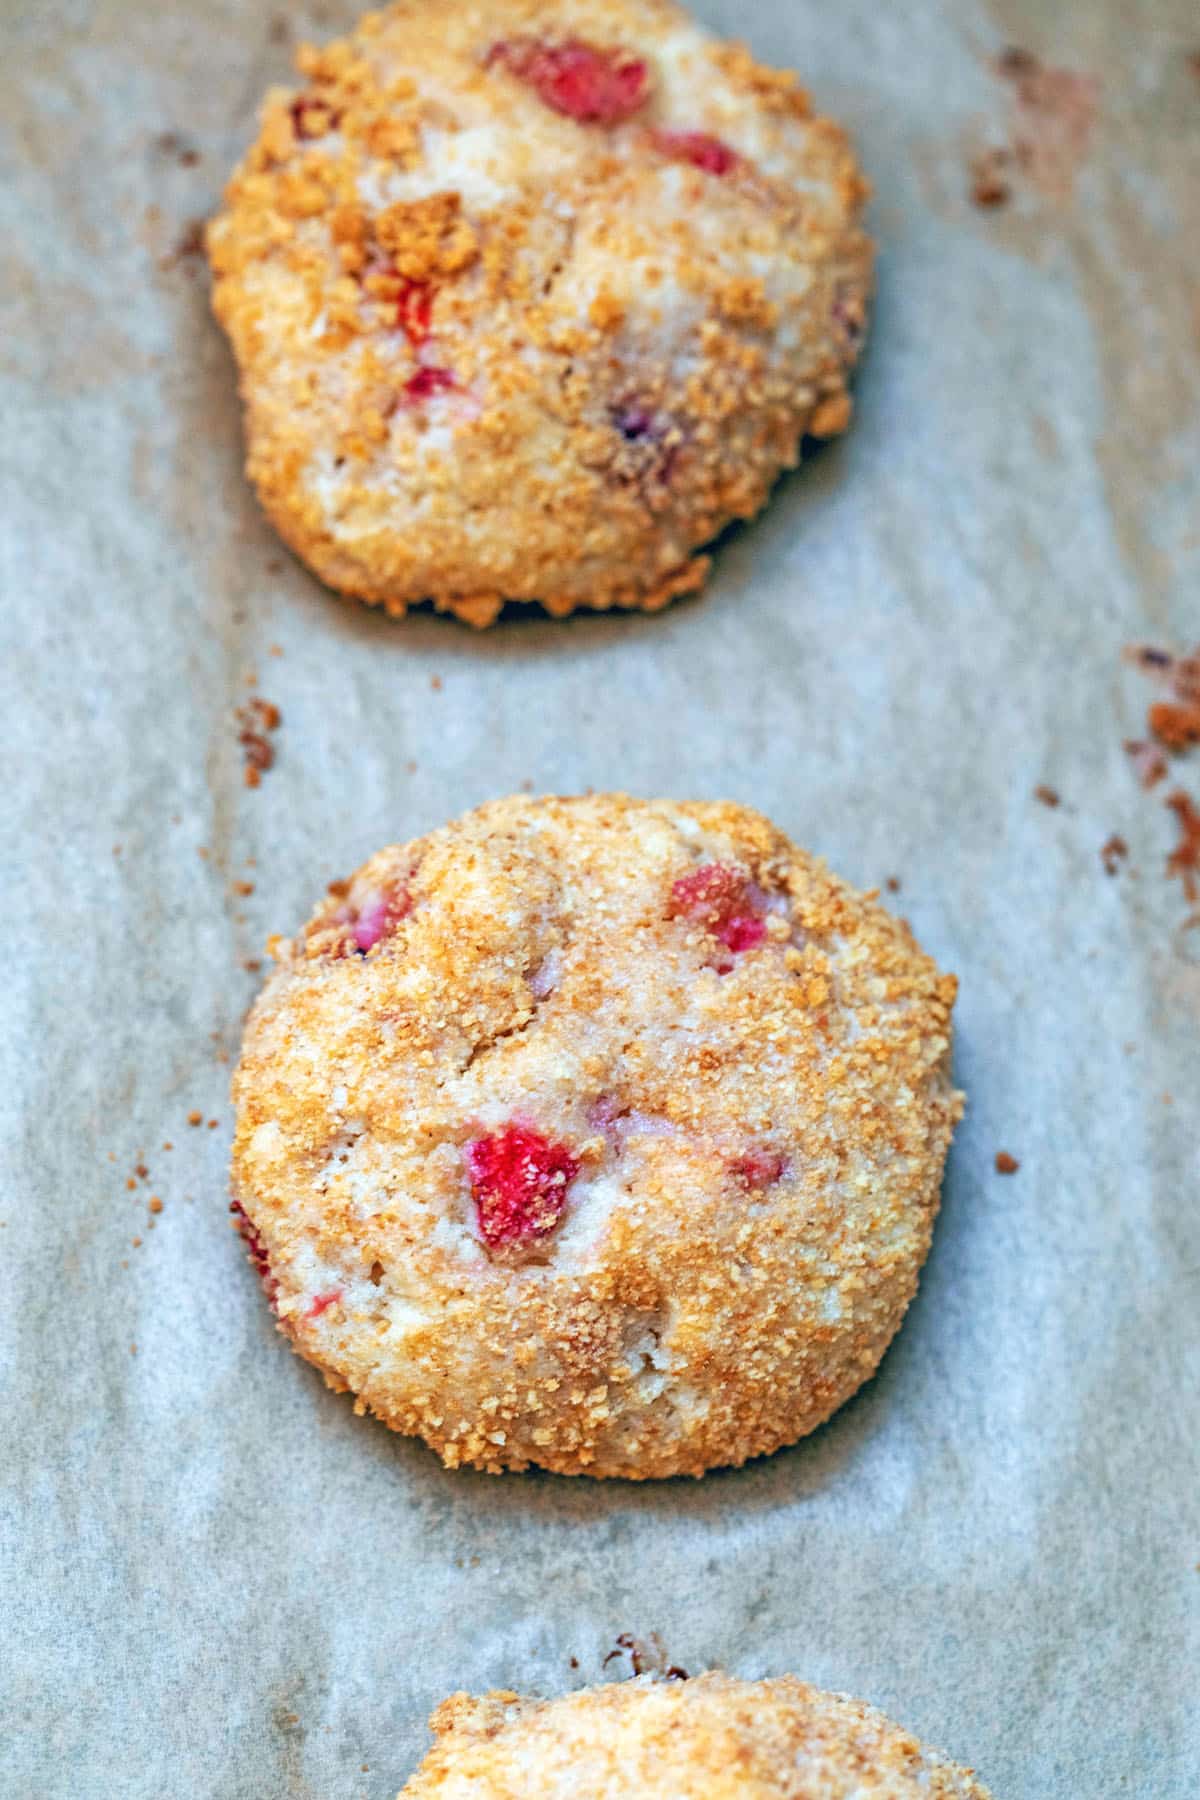 Strawberry cheesecake cookies baked on parchment paper-lined baking sheet.